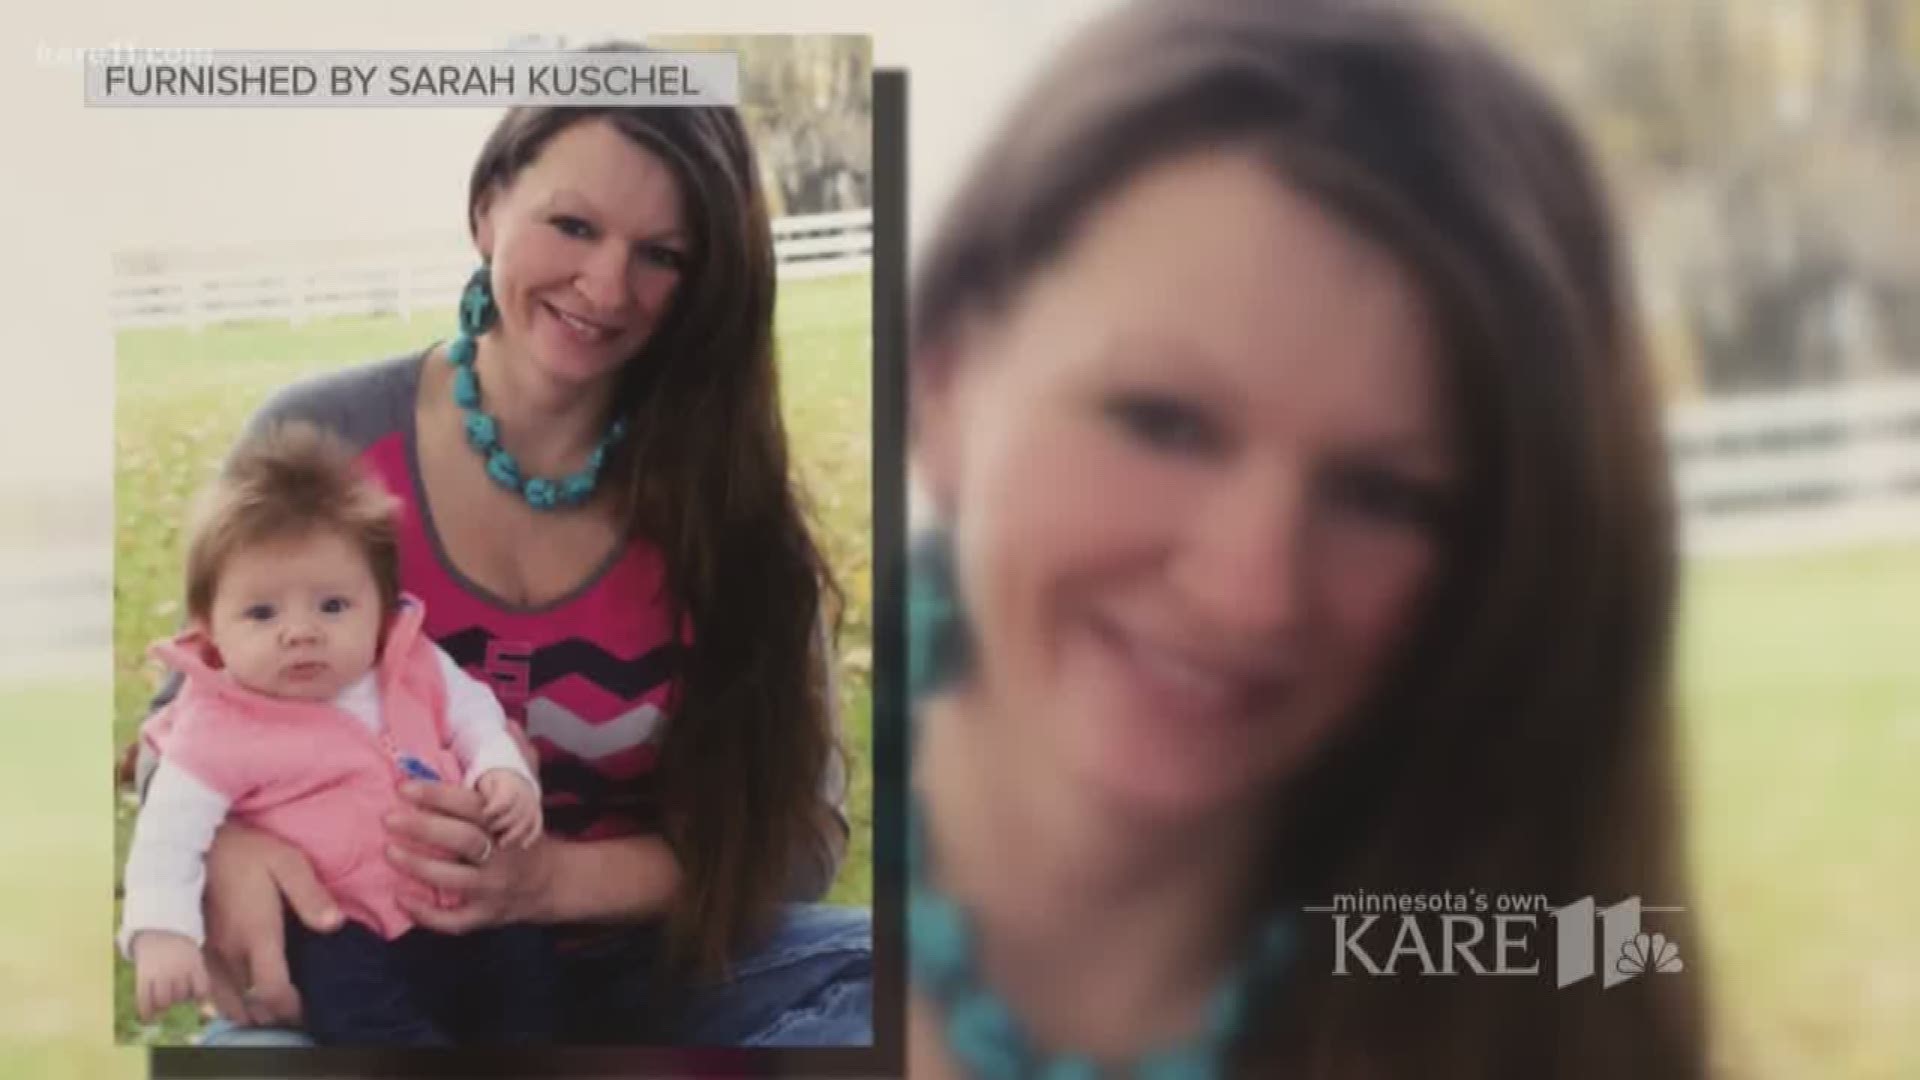 The Kuschel family is waiting to see if a judge accepts the boyfriend's plea deal.